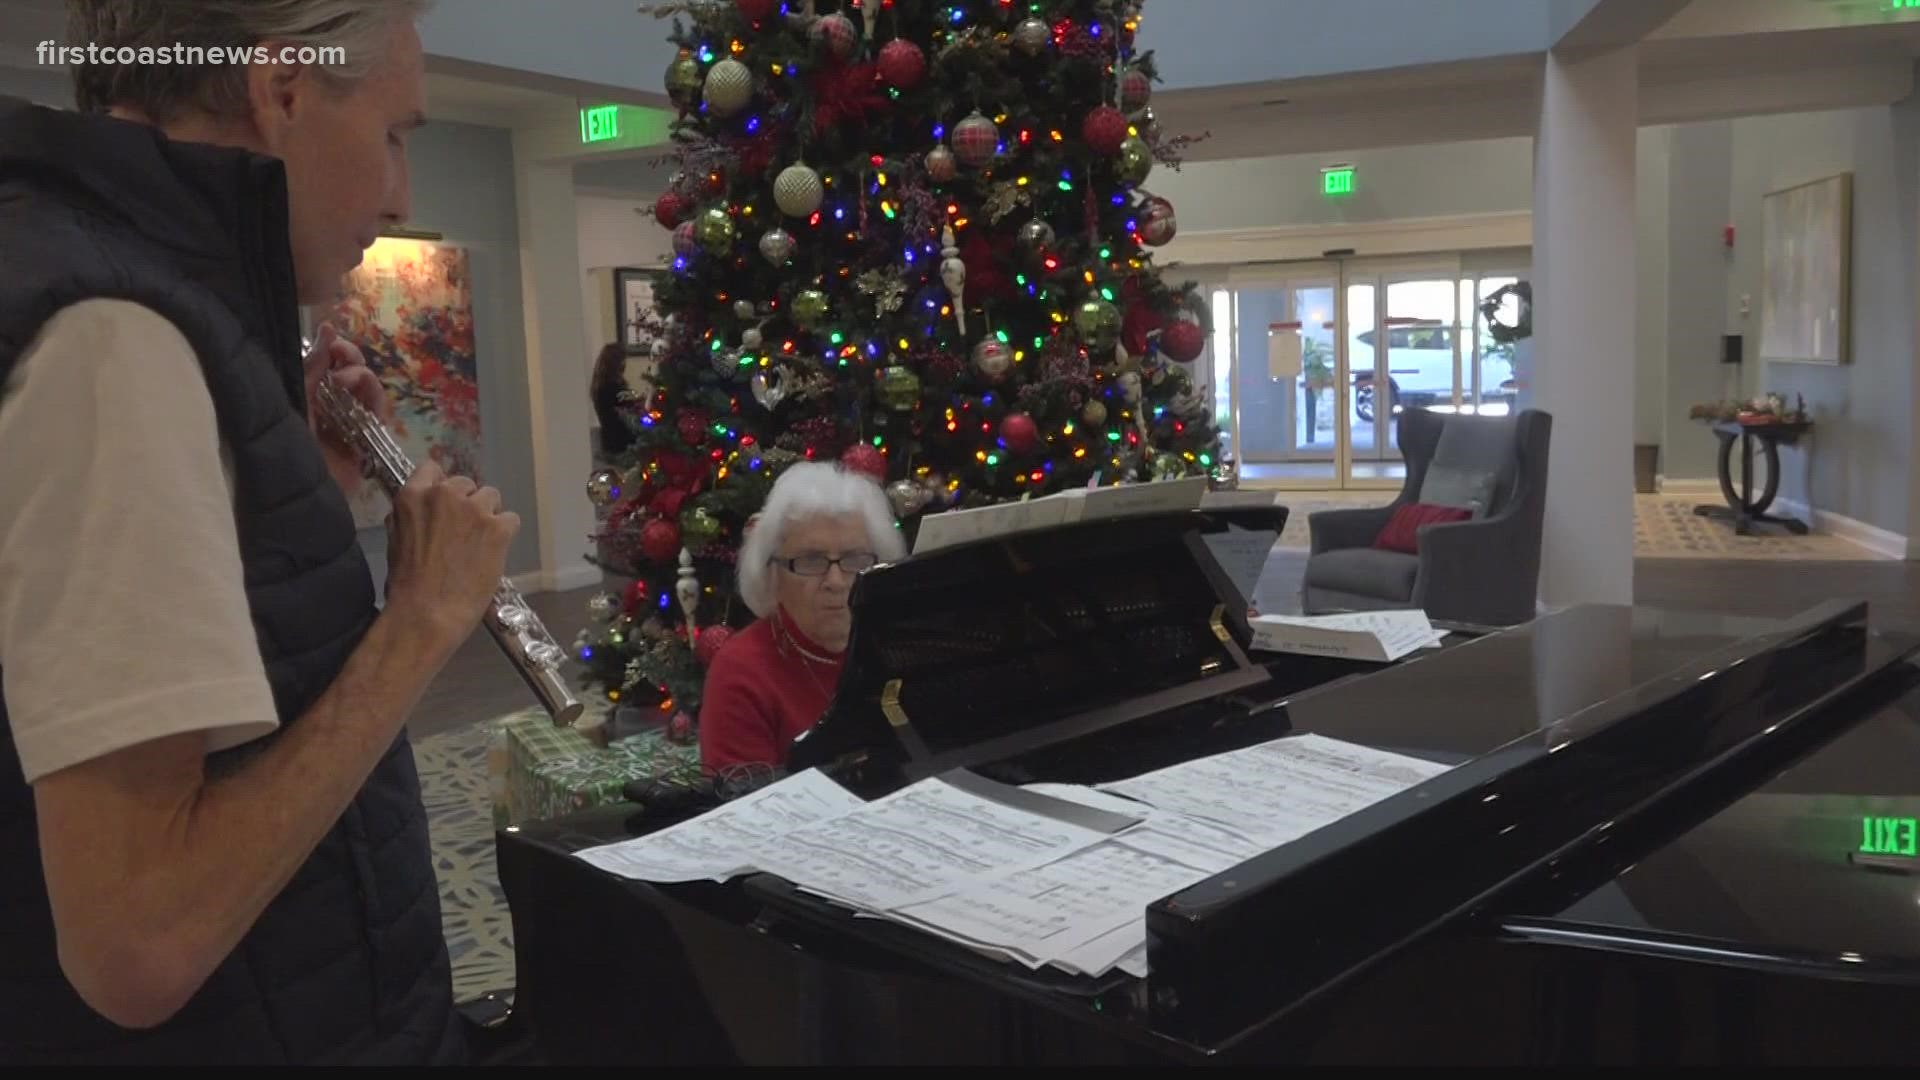 98 year old Alma Glasser will hold a concert for residents of her senior living facility on Christmas.